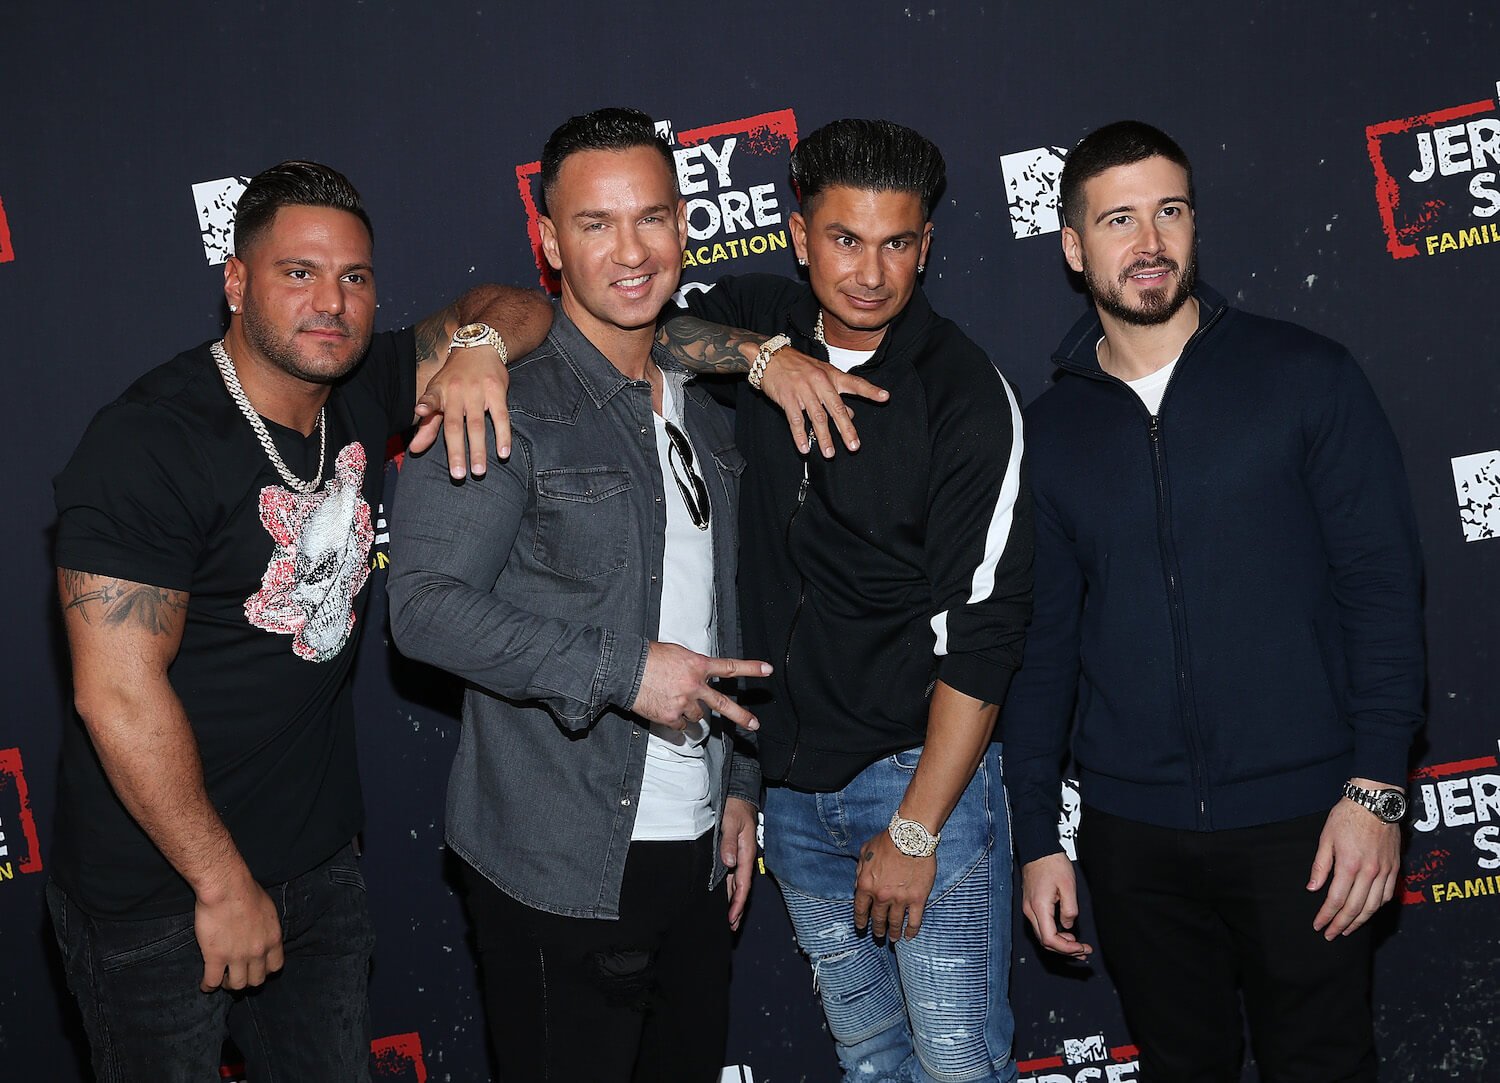 Ronnie Ortiz-Magro, Mike 'The Situation' Sorrentino, Paul 'Pauly D' DelVecchio, and Vinny Guadagnino attend the 'Jersey Shore: Family Vacation' premiere